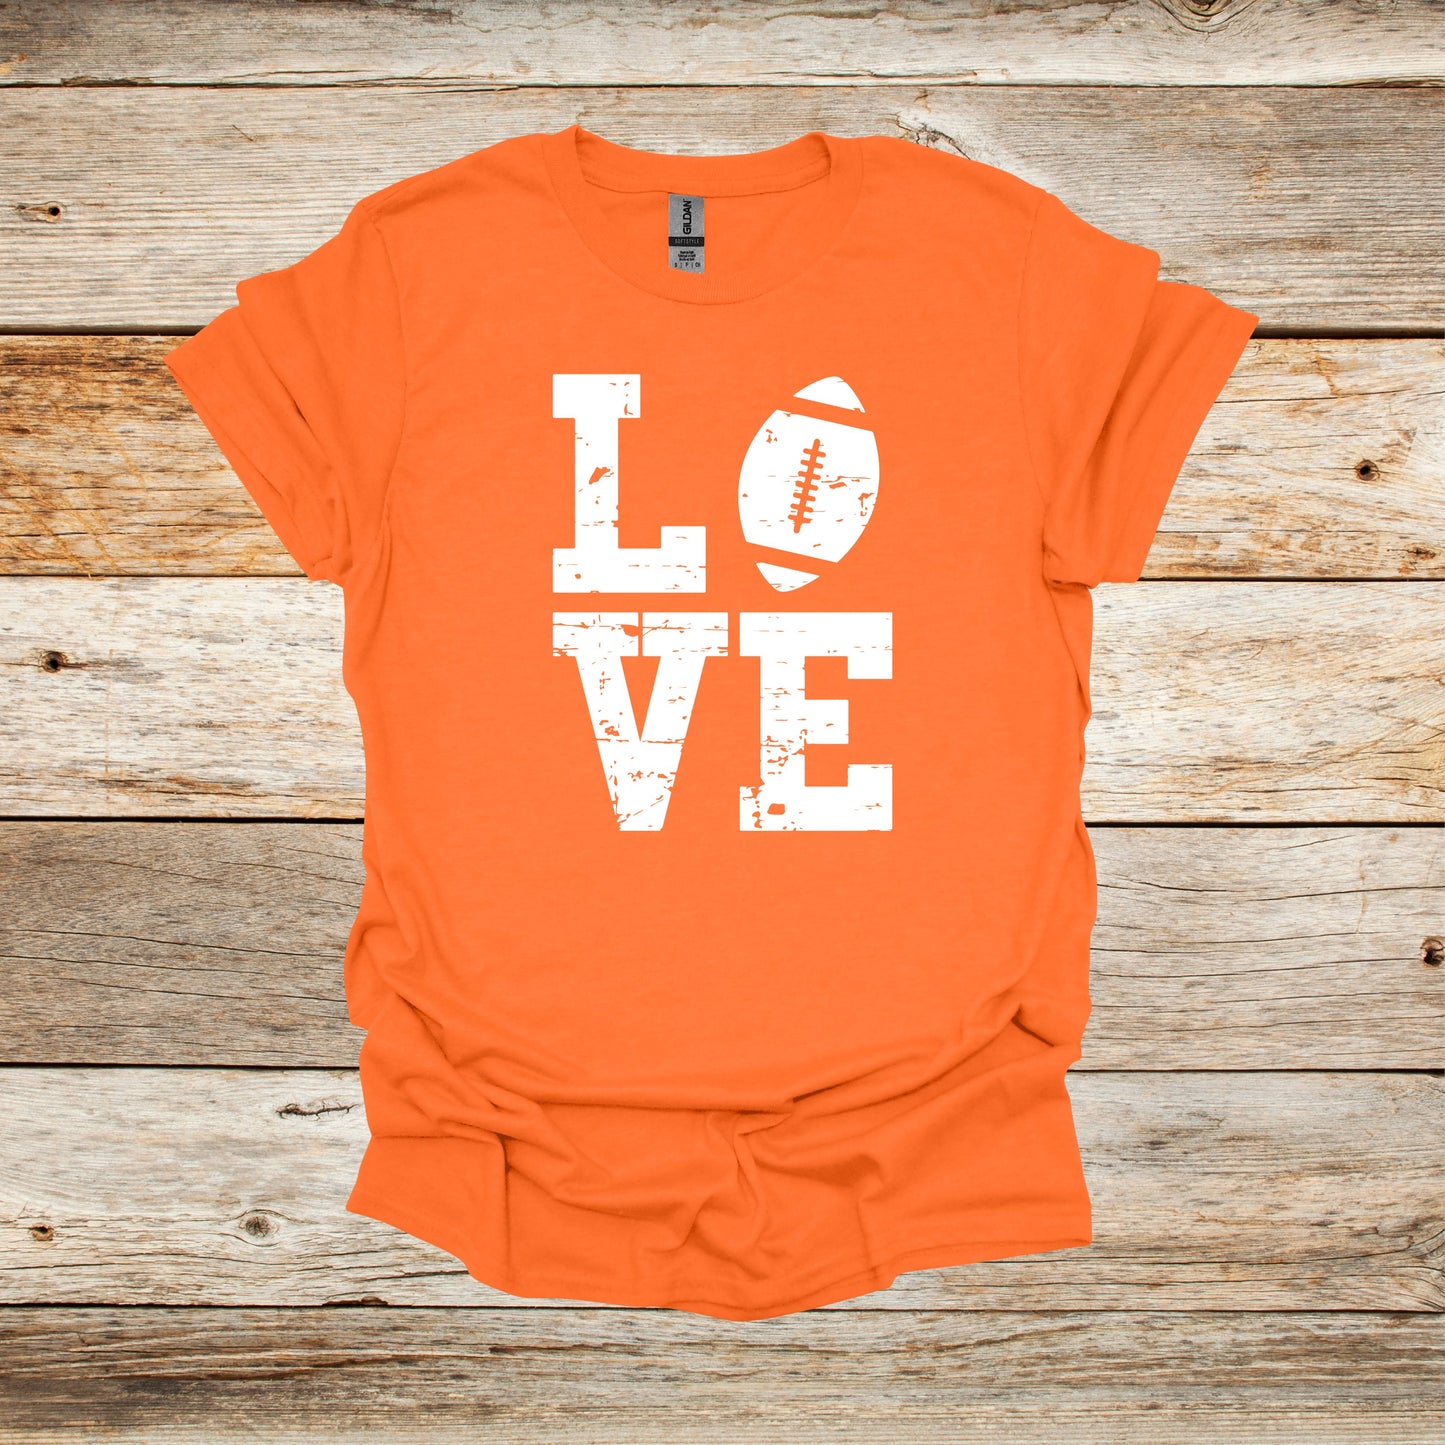 Football T-Shirt - LOVE - Adult and Children's Tee Shirts - Sports T-Shirts Graphic Avenue Orange Adult Small 